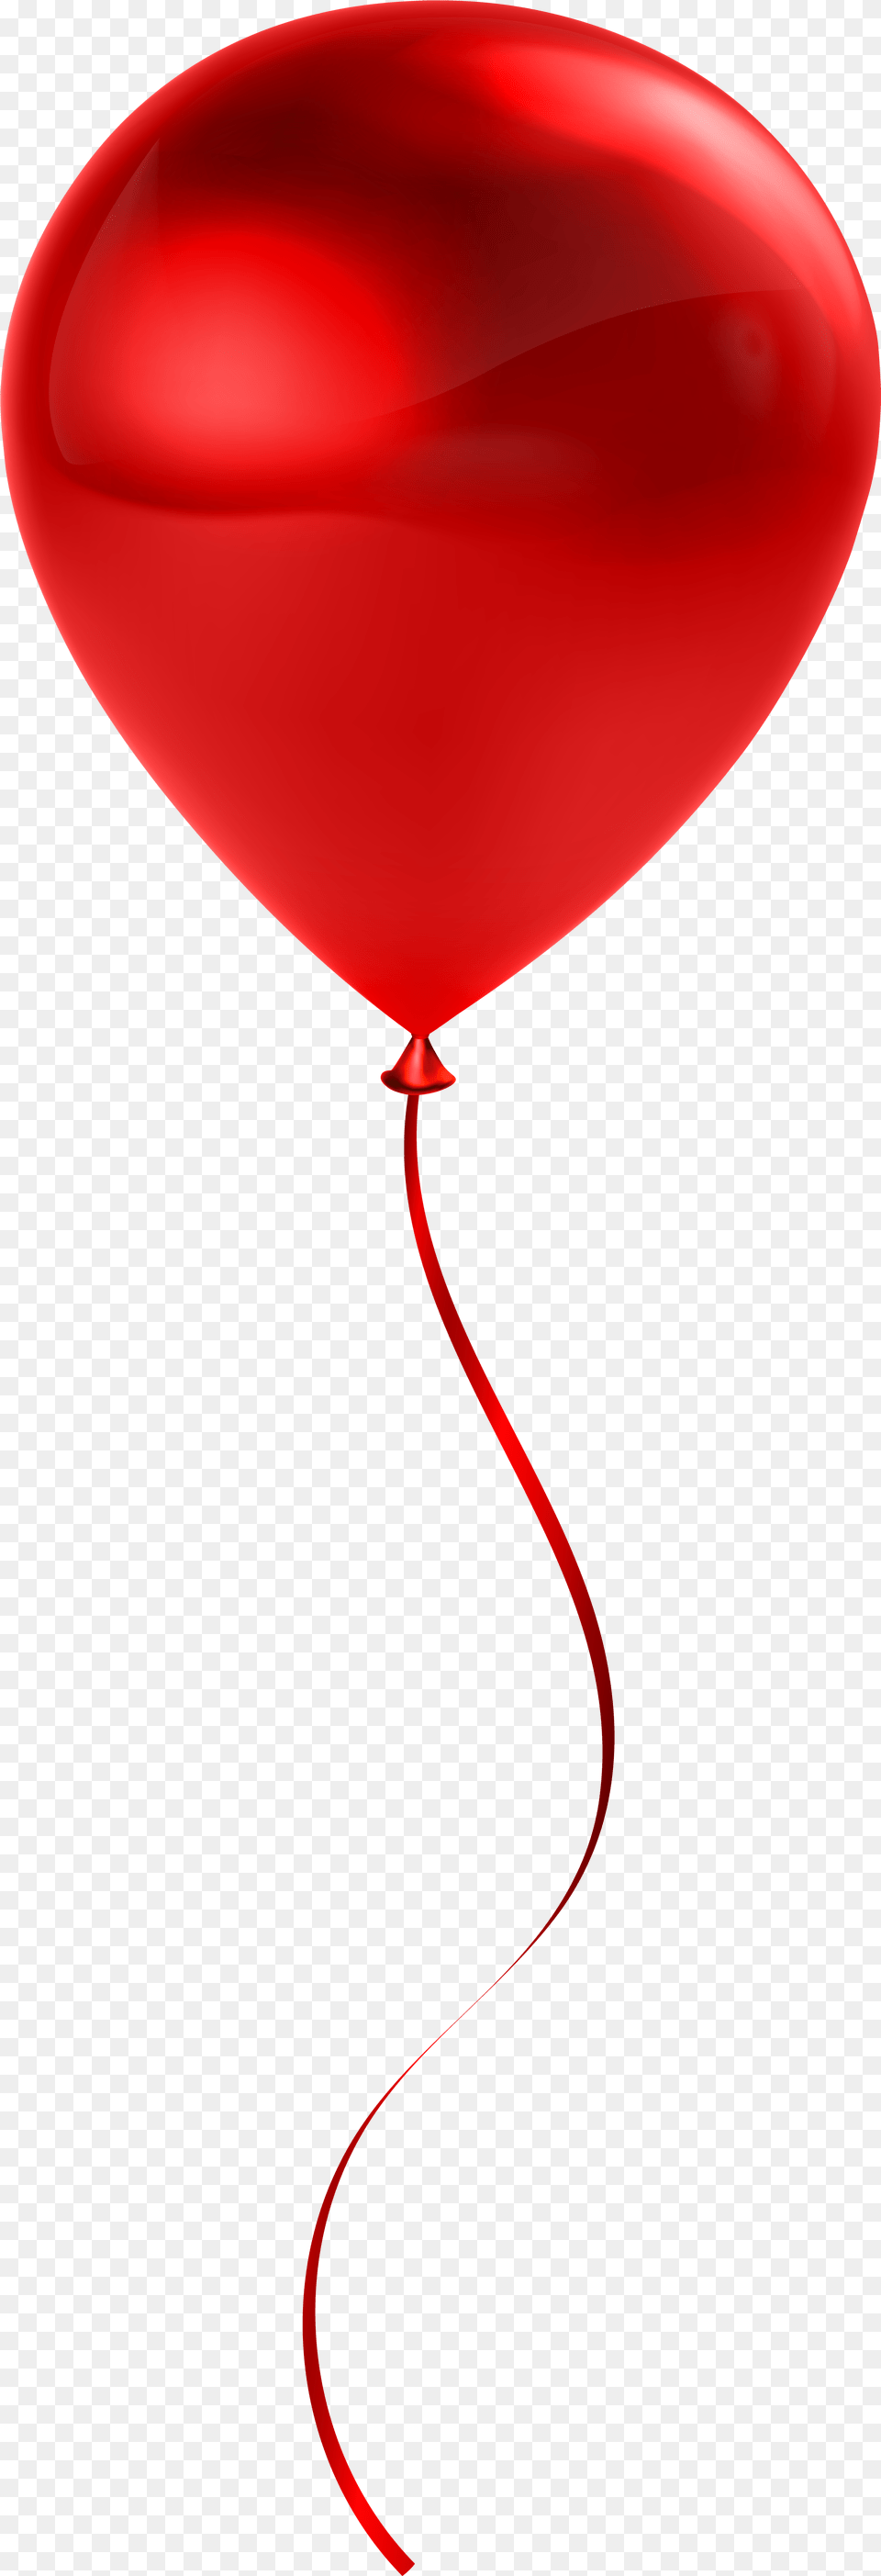 Transparent Two Heart Red Balloon Transparent Background Png Image